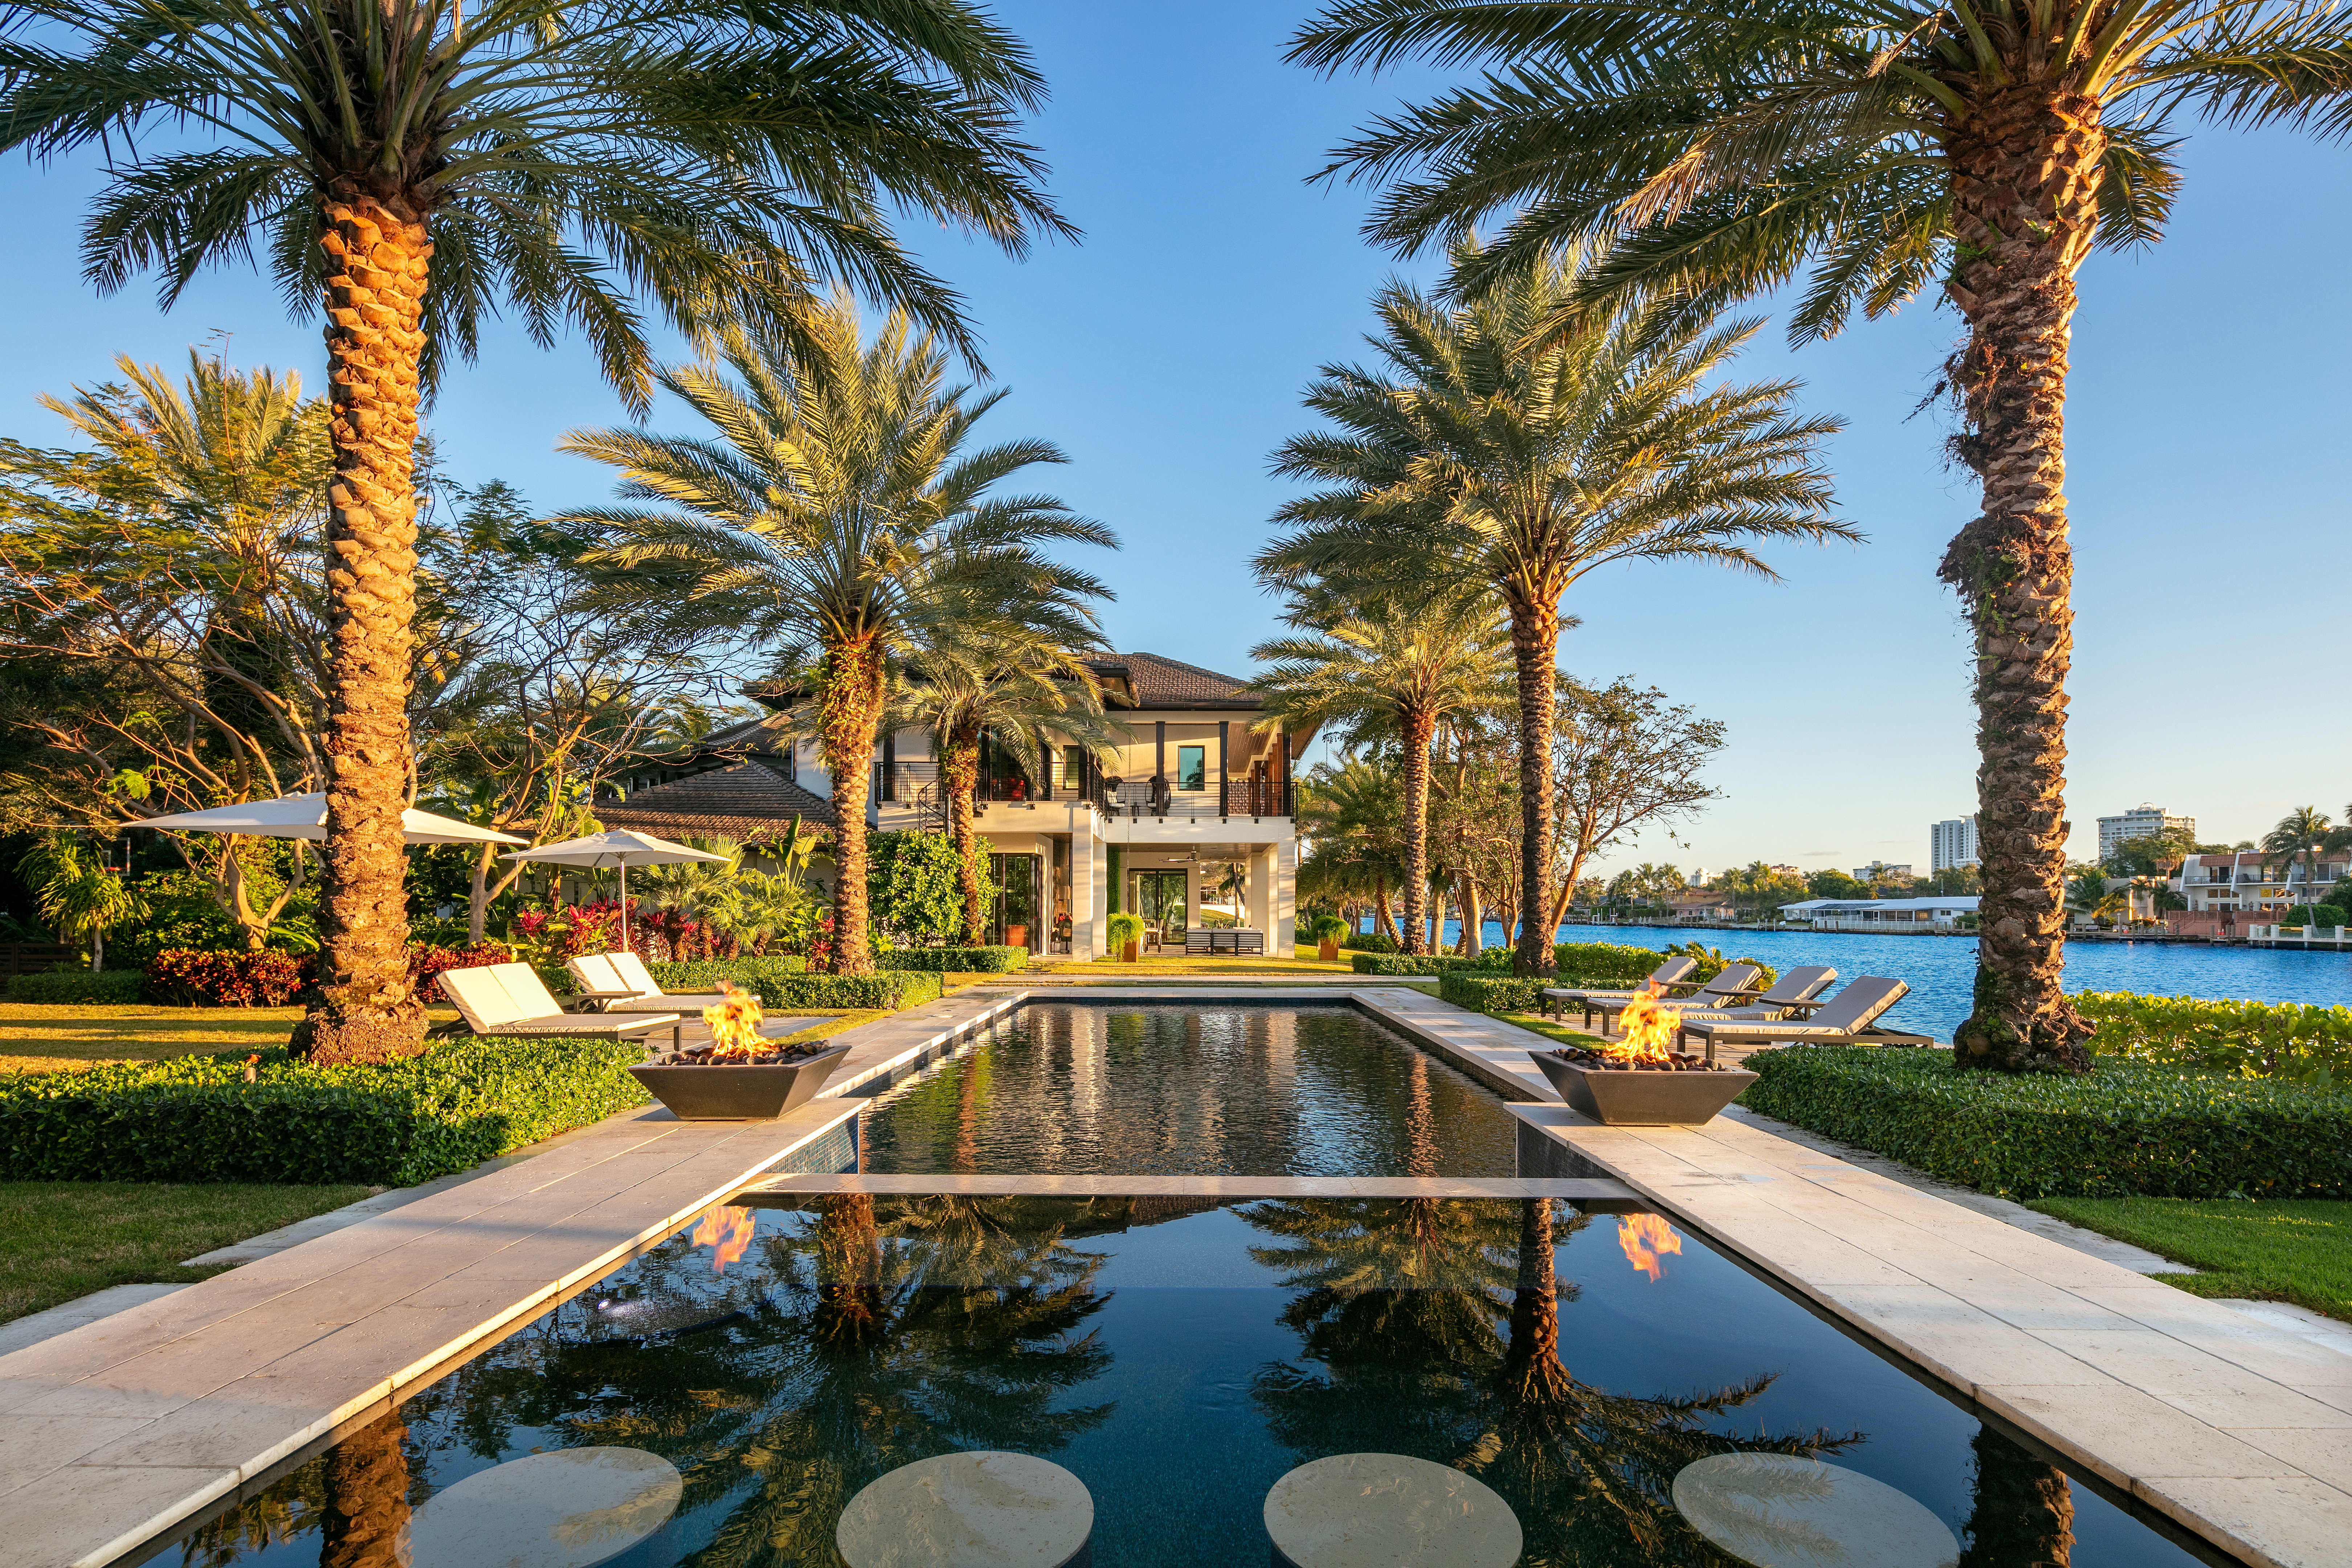 Pool at Compass listing 141 Bay Colony in Fort Lauderdale